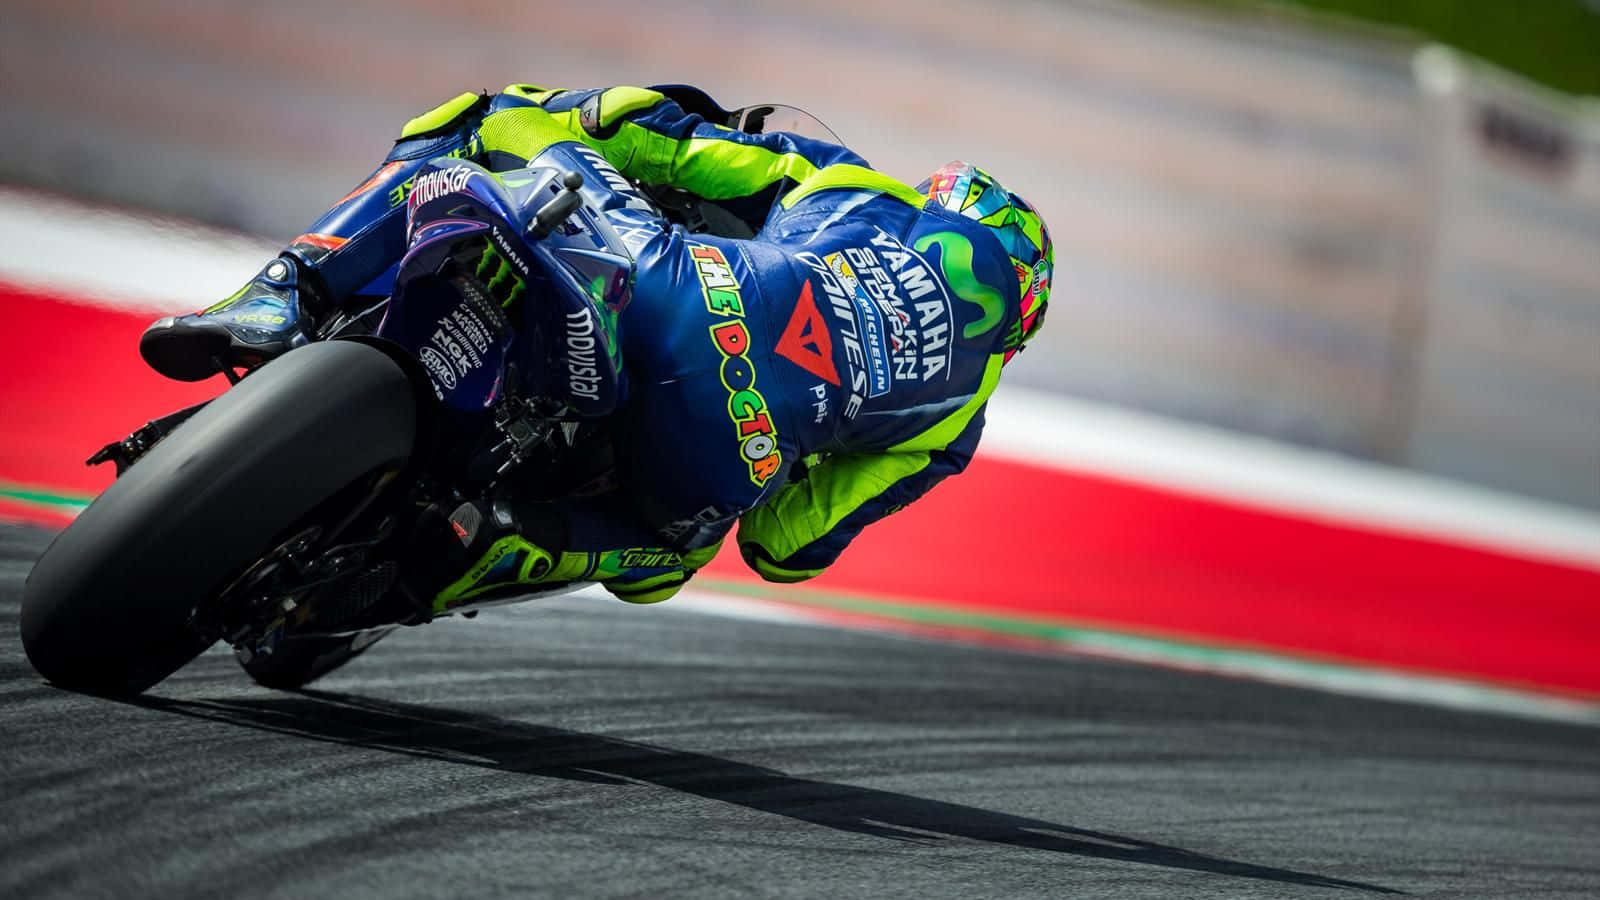 Vr46 Banking On A Curved Race Track Wallpaper